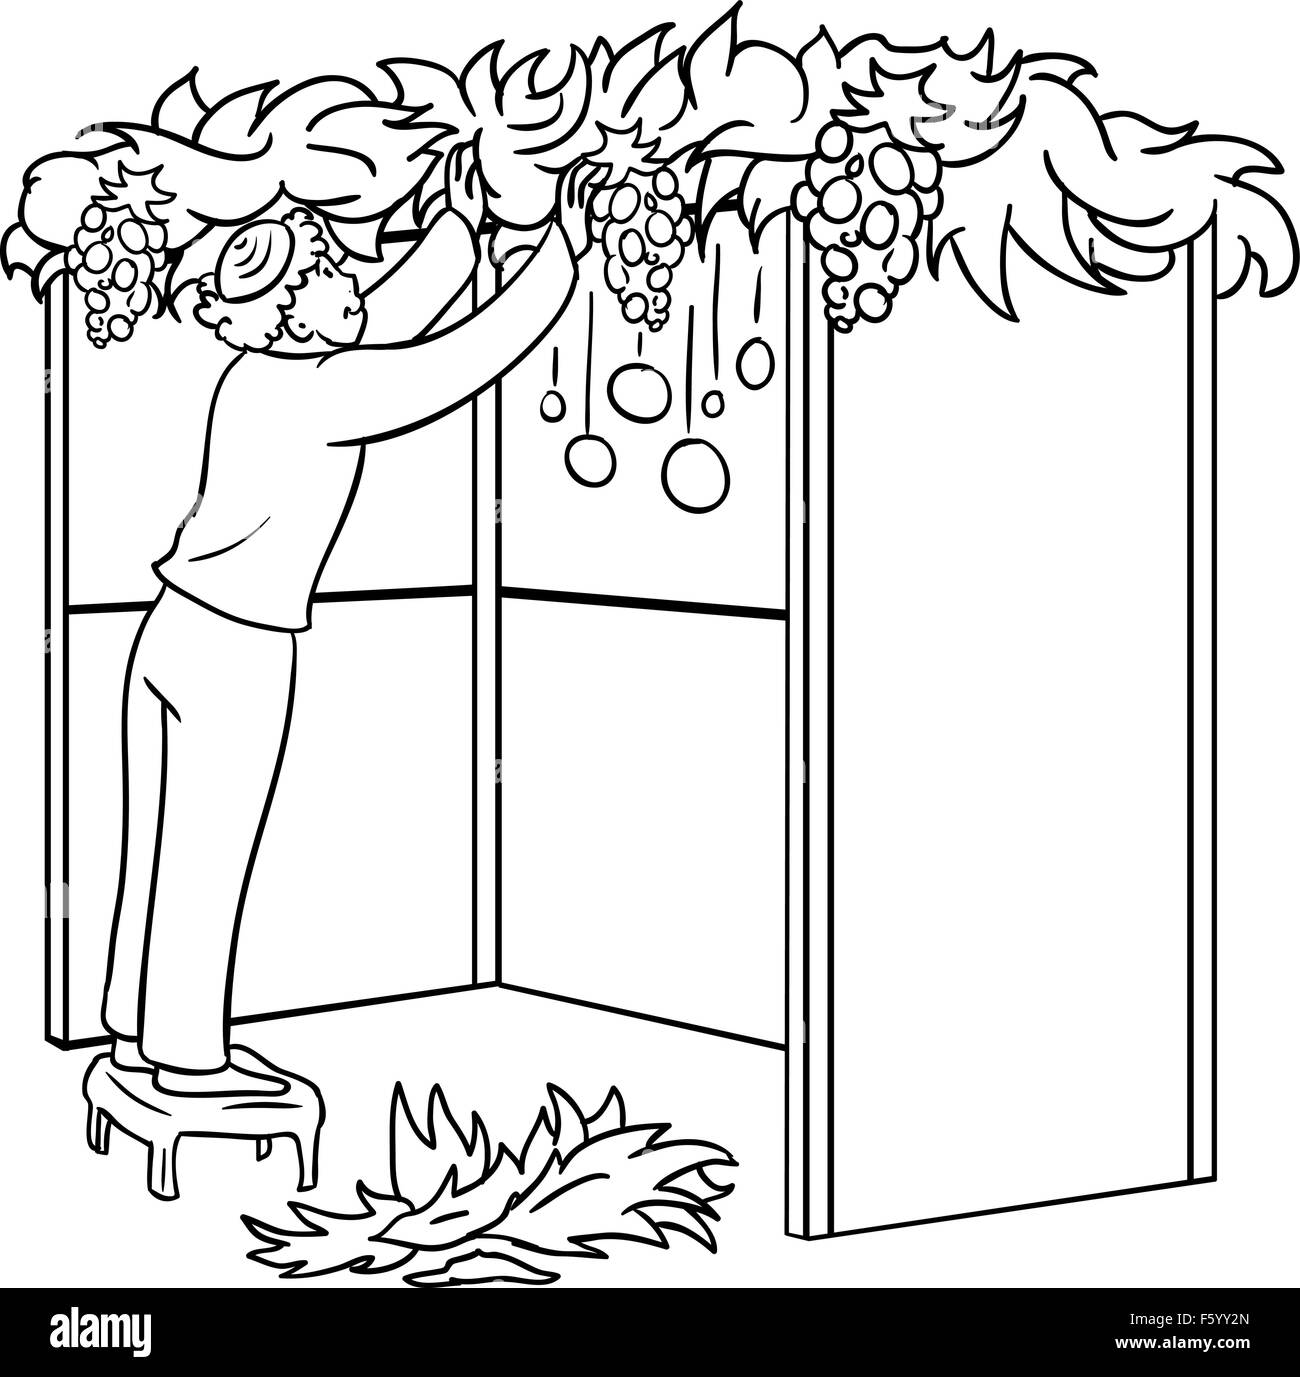 A vector illustration coloring page of a Jewish guy standing on a stool and building a Sukkah for the Jewish holiday Sukkot. Stock Vector